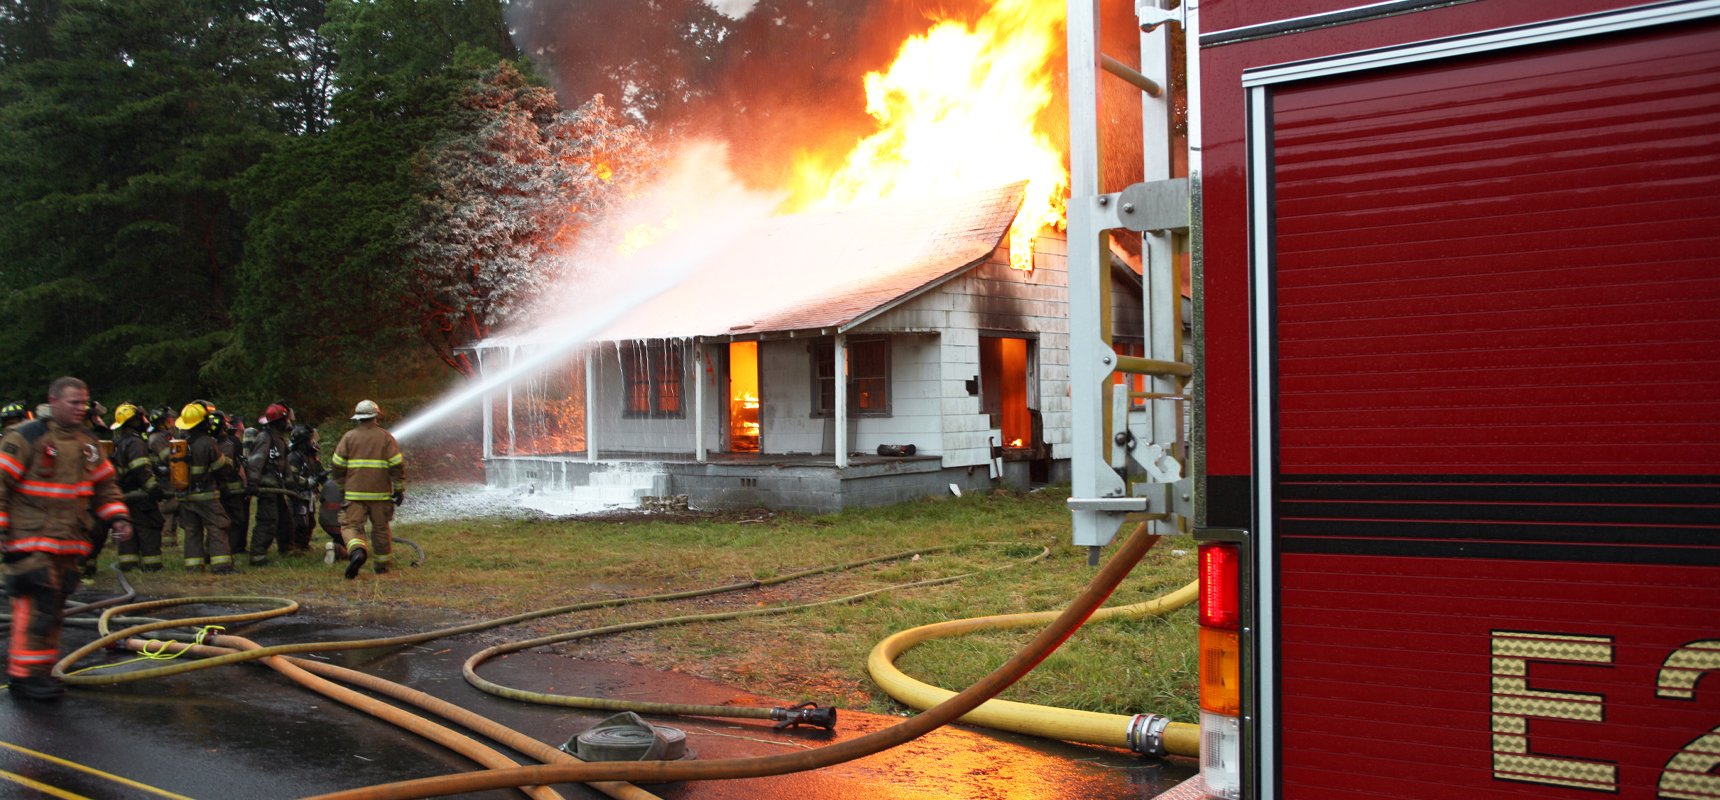 A live fire burning house with fire fighters and a Pierce fire apparatus on the scene using a fire-fighting foam system to put out the fire.